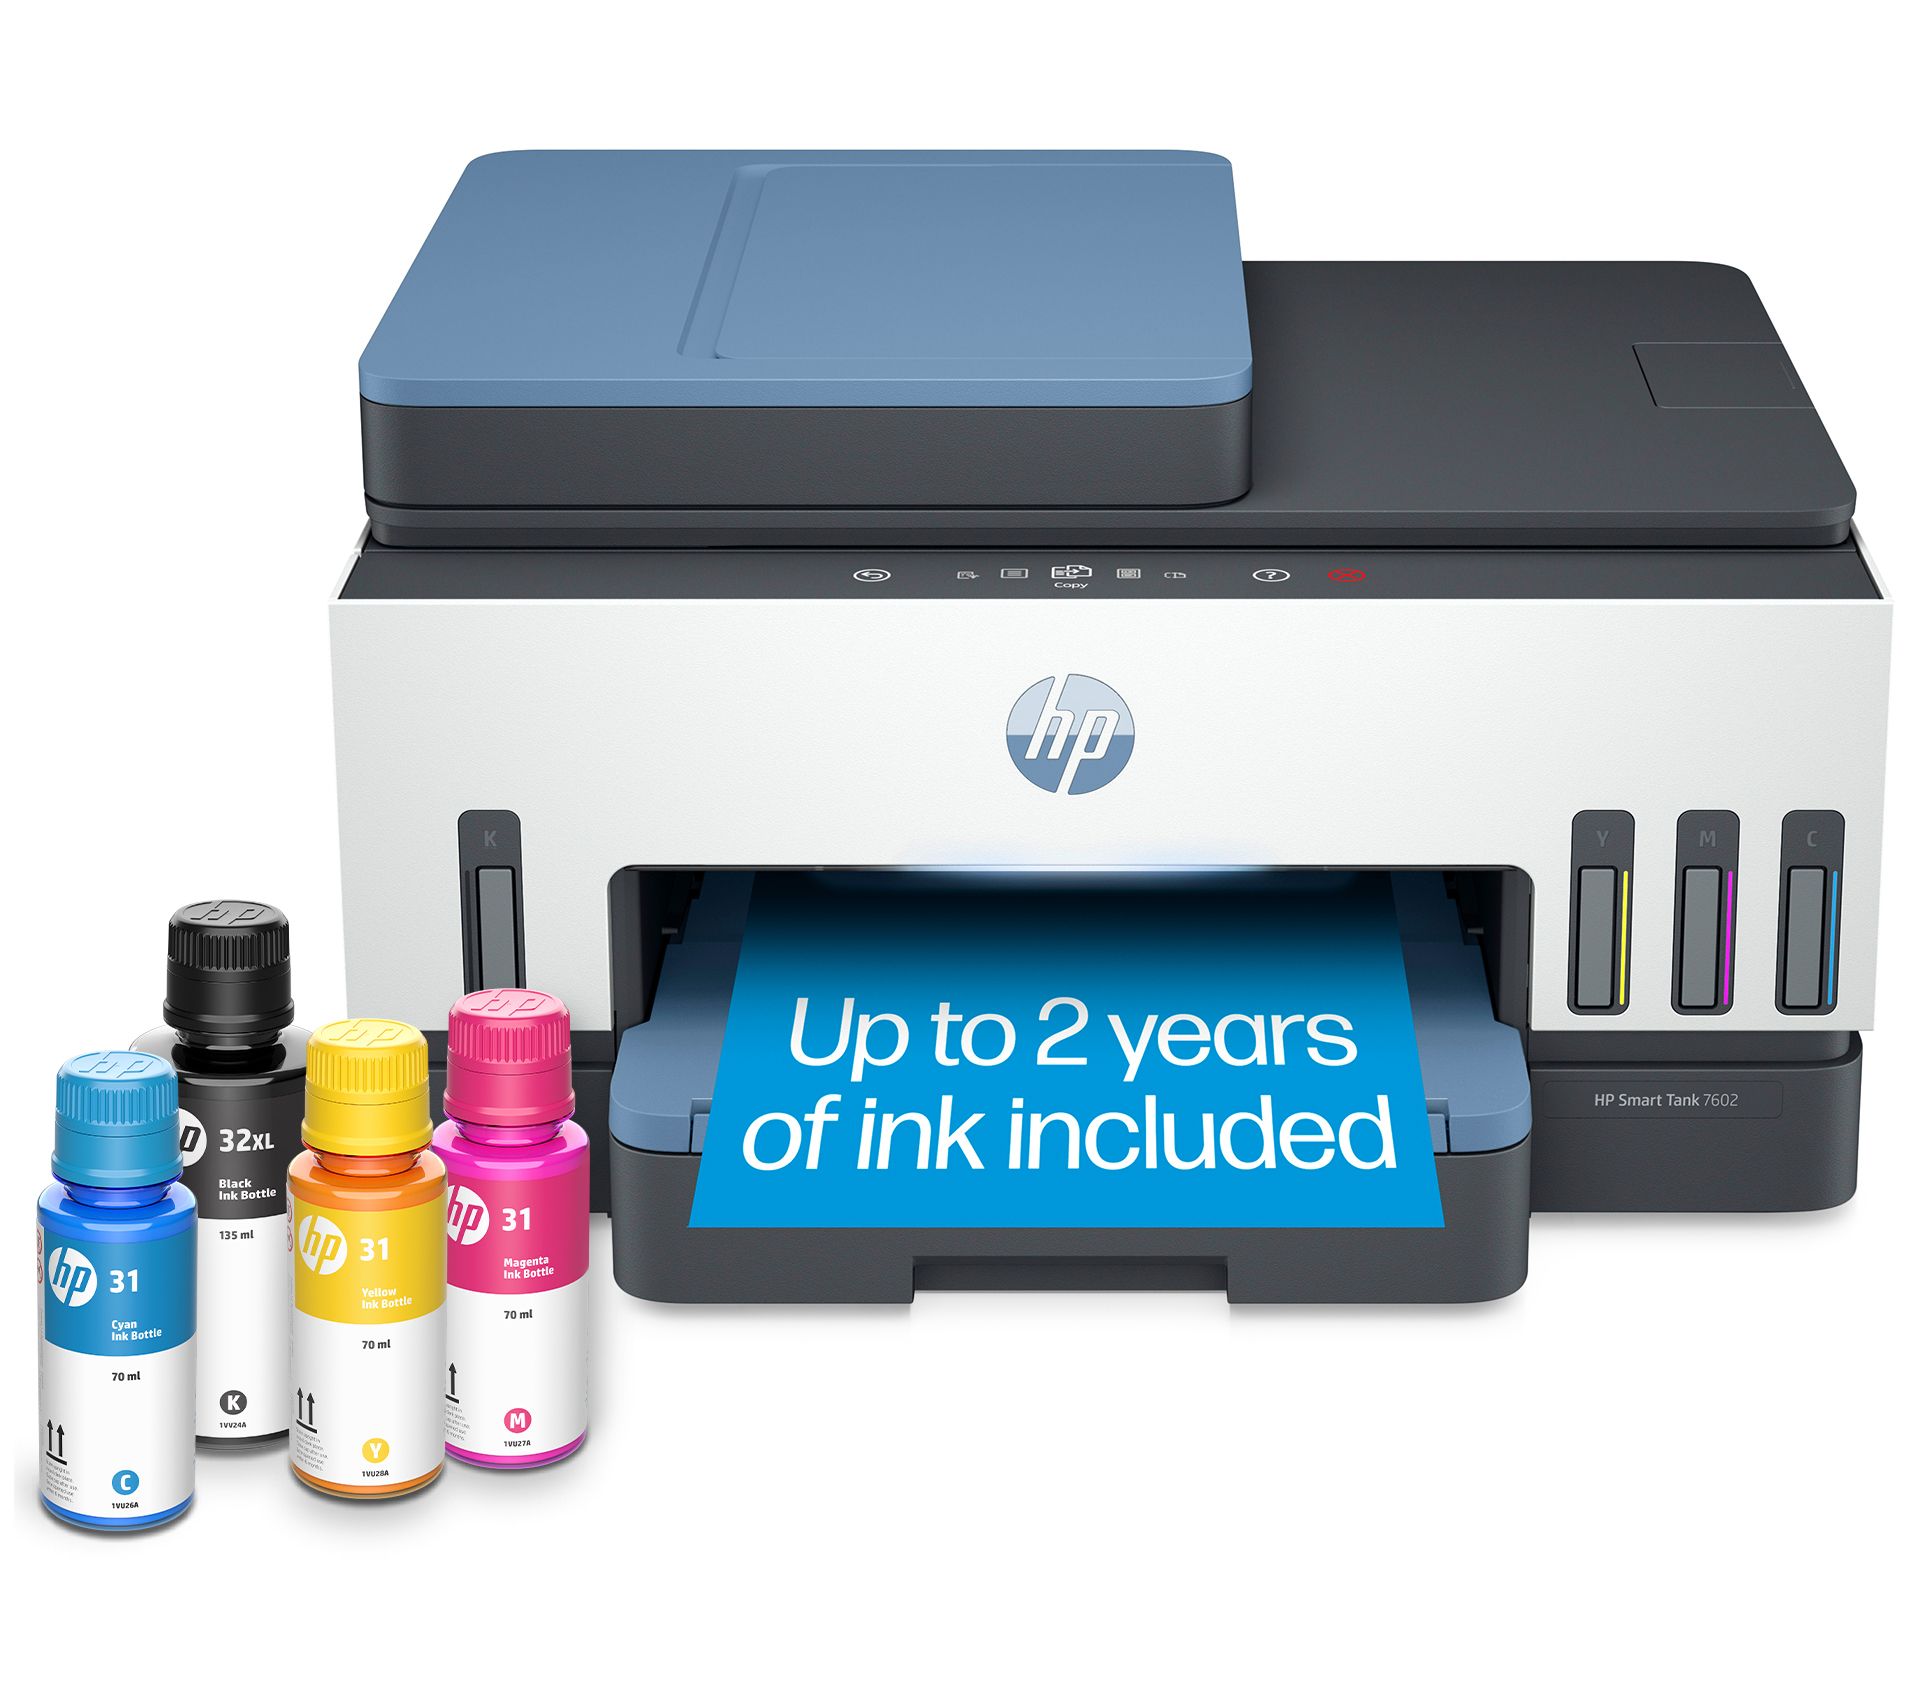 HP Smart Tank 7602 All-in-One Printer with 2 Years of Ink on QVC 